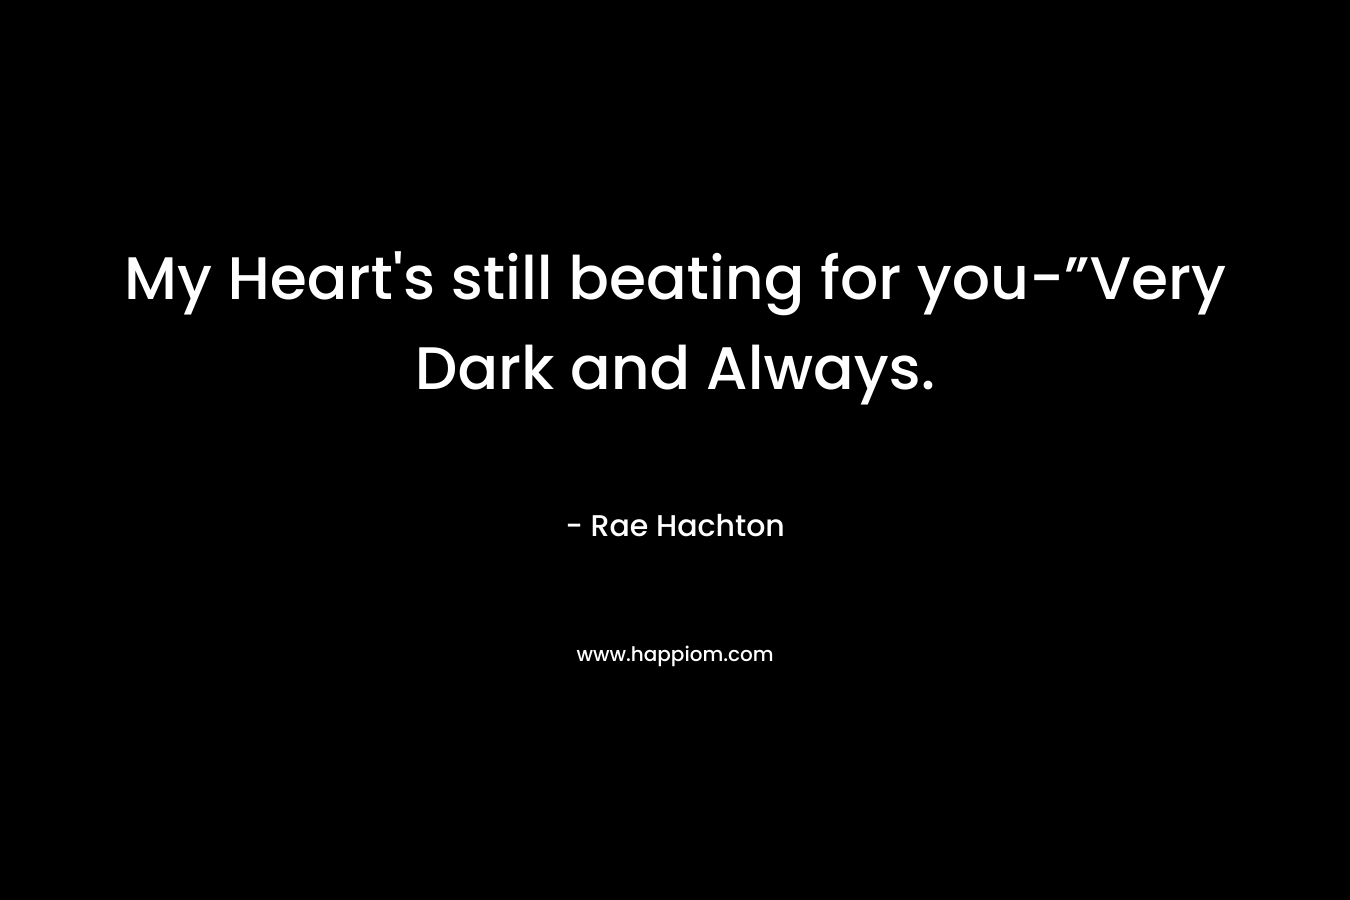 My Heart's still beating for you-”Very Dark and Always.